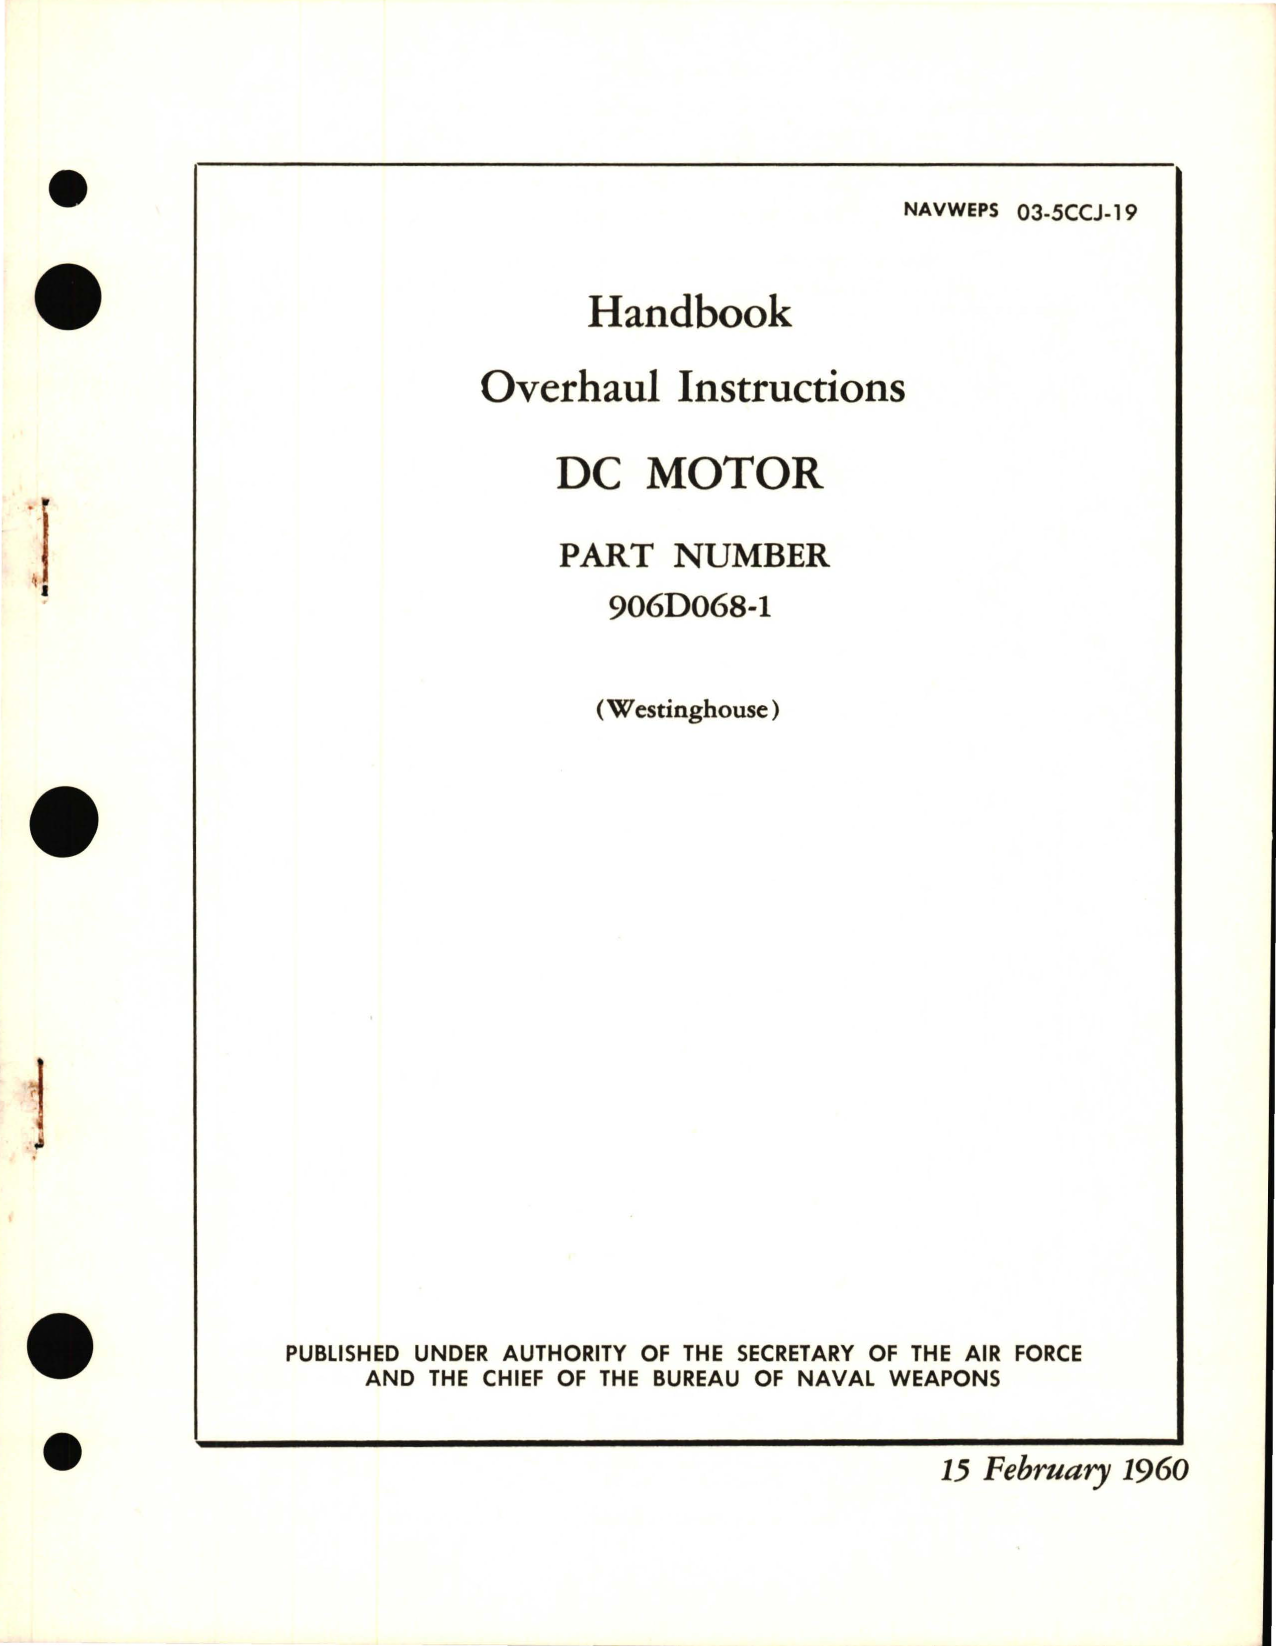 Sample page 1 from AirCorps Library document: Overhaul Instructions for DC Motor - Part 906D068-1